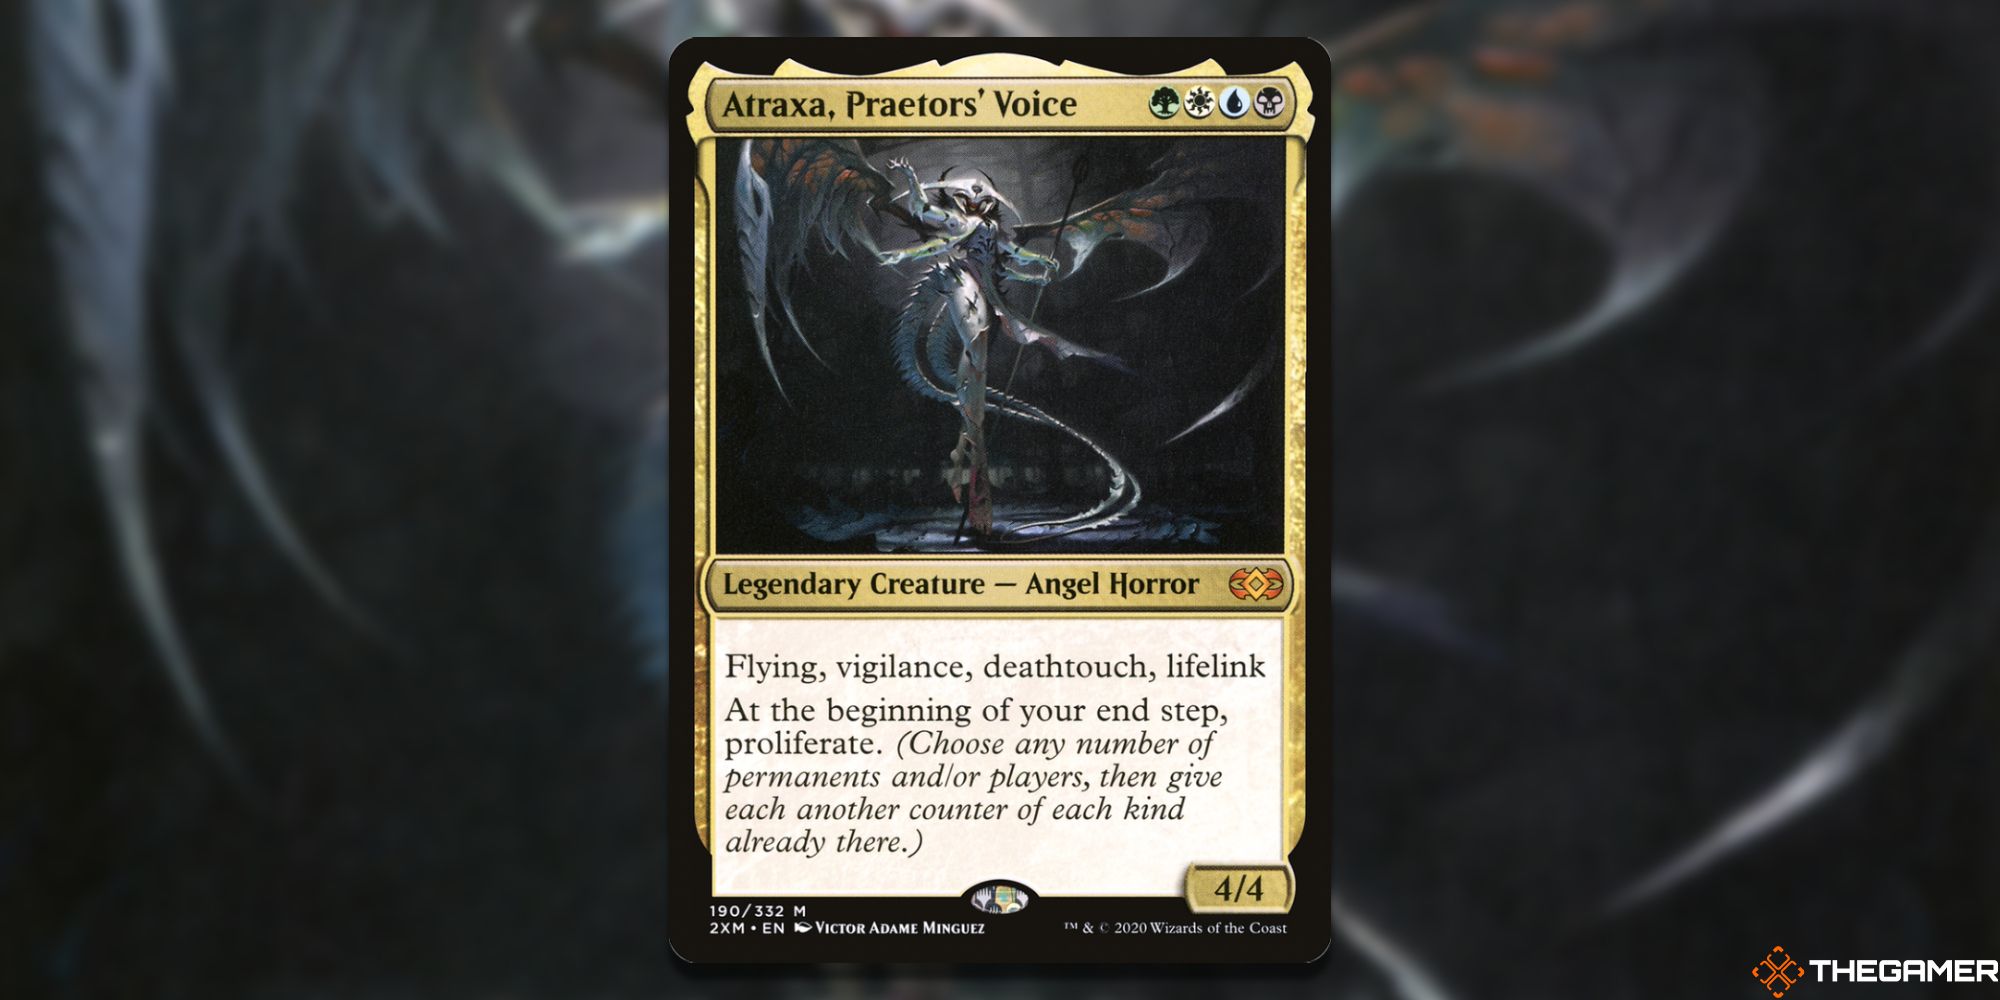 Image of Atraxa, the Praetor voice card in Magic: The Gathering, with artwork by Victor Adame Minguez